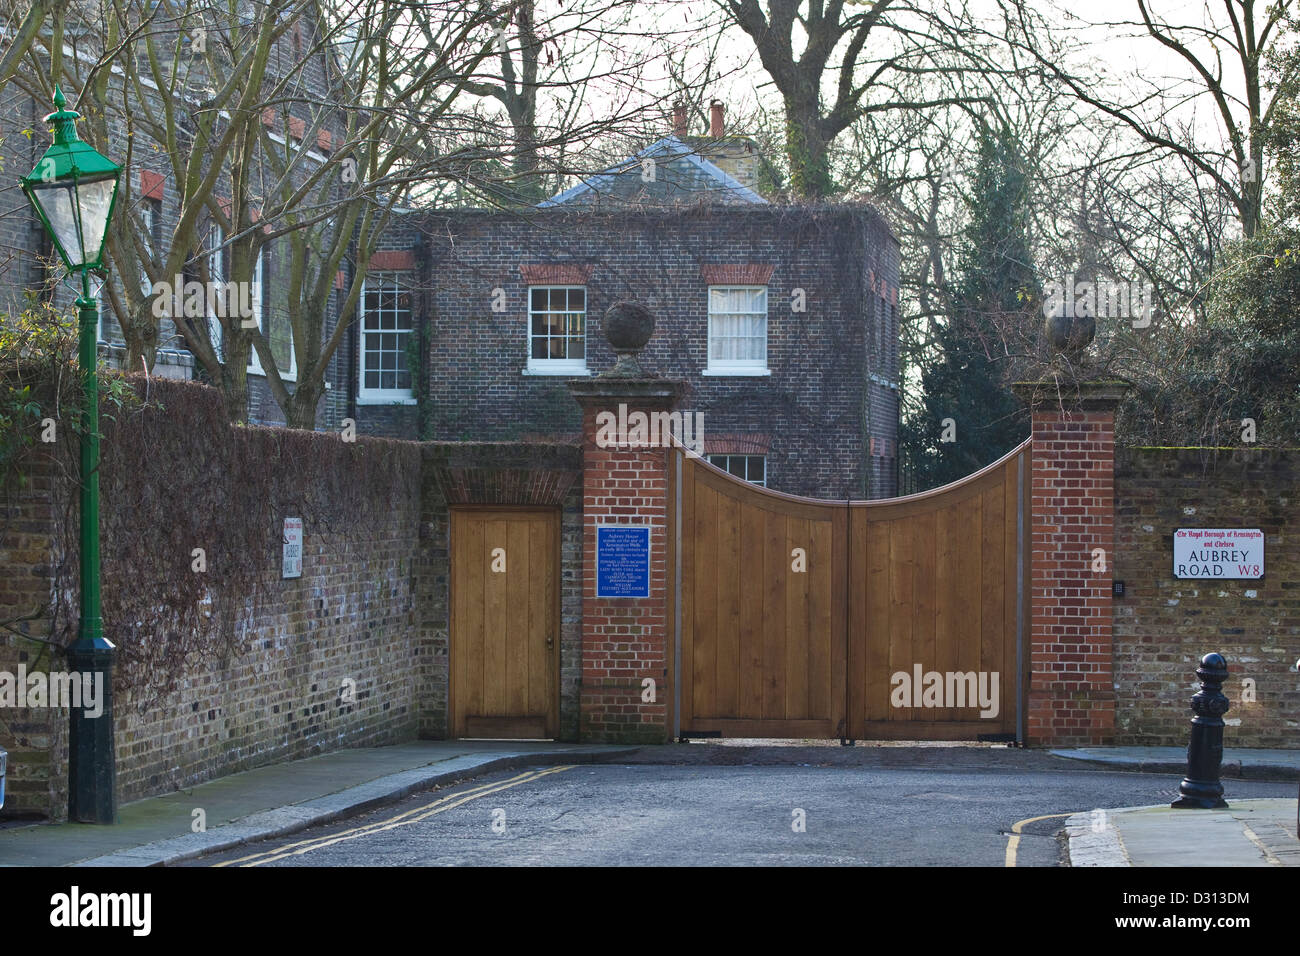 Aubrey House, in Campden Hill area of Holland Park, West London, England, United Kingdom Stock Photo